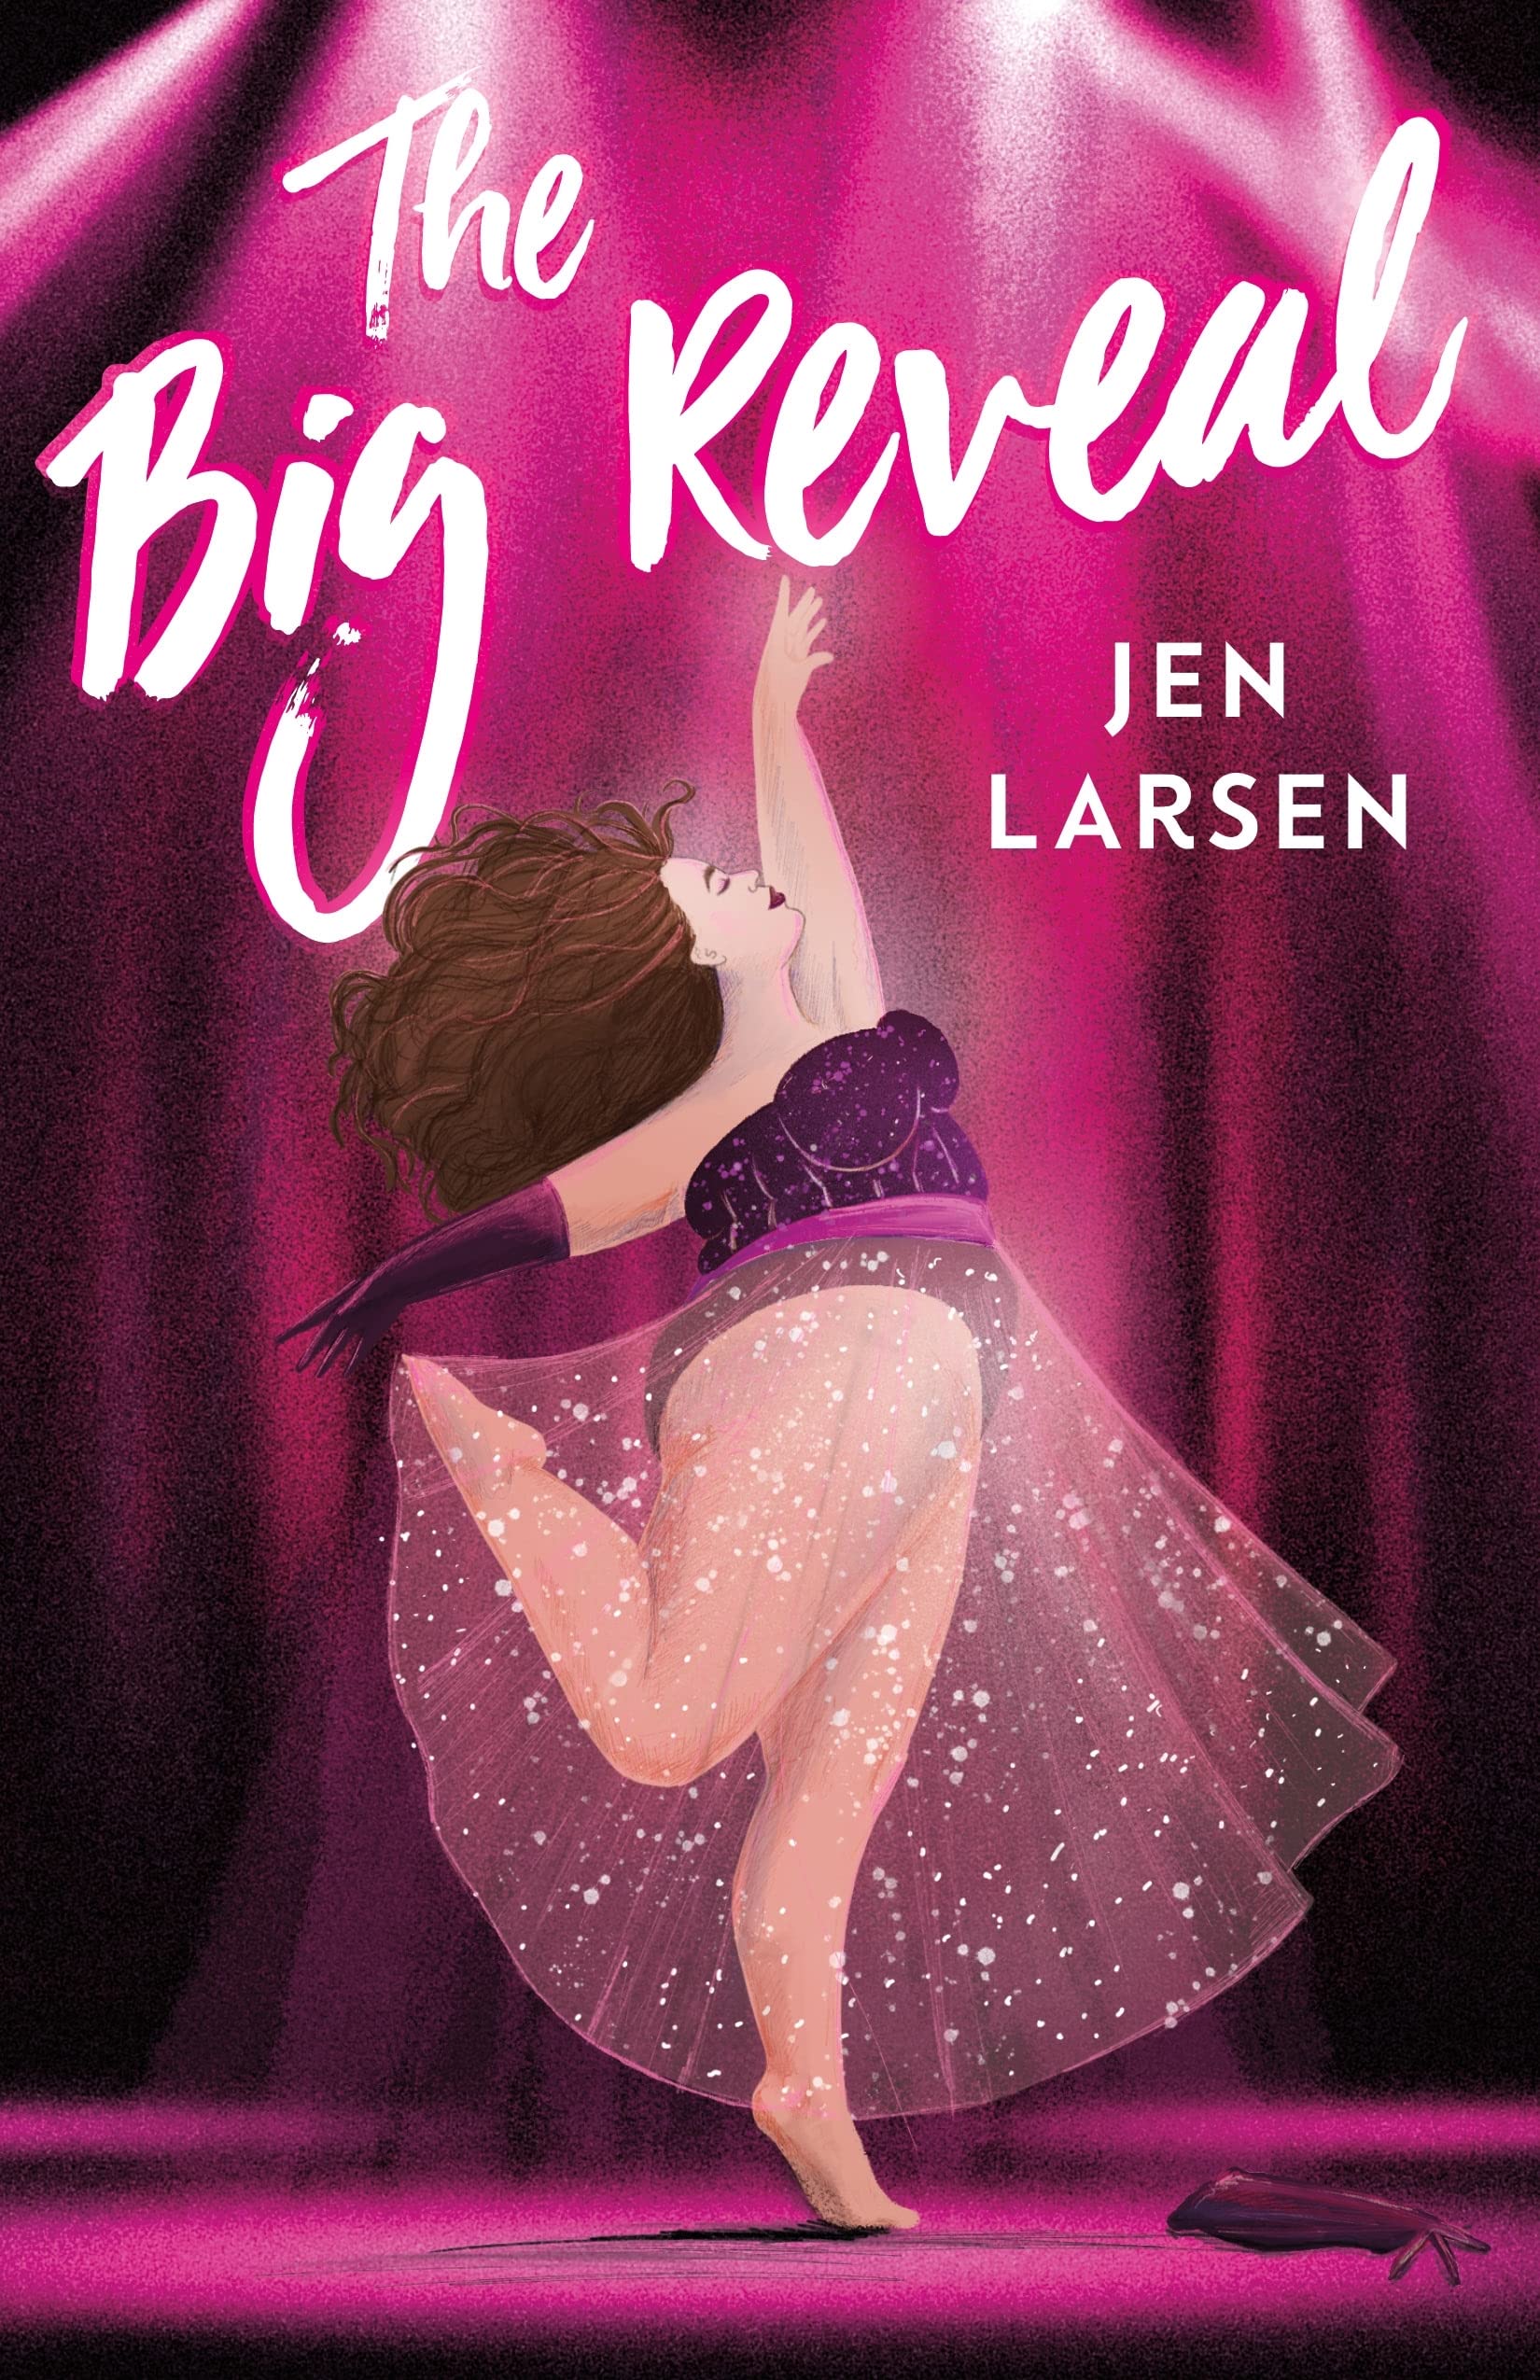 Cover of “The Big Reveal” by Jen Larsen